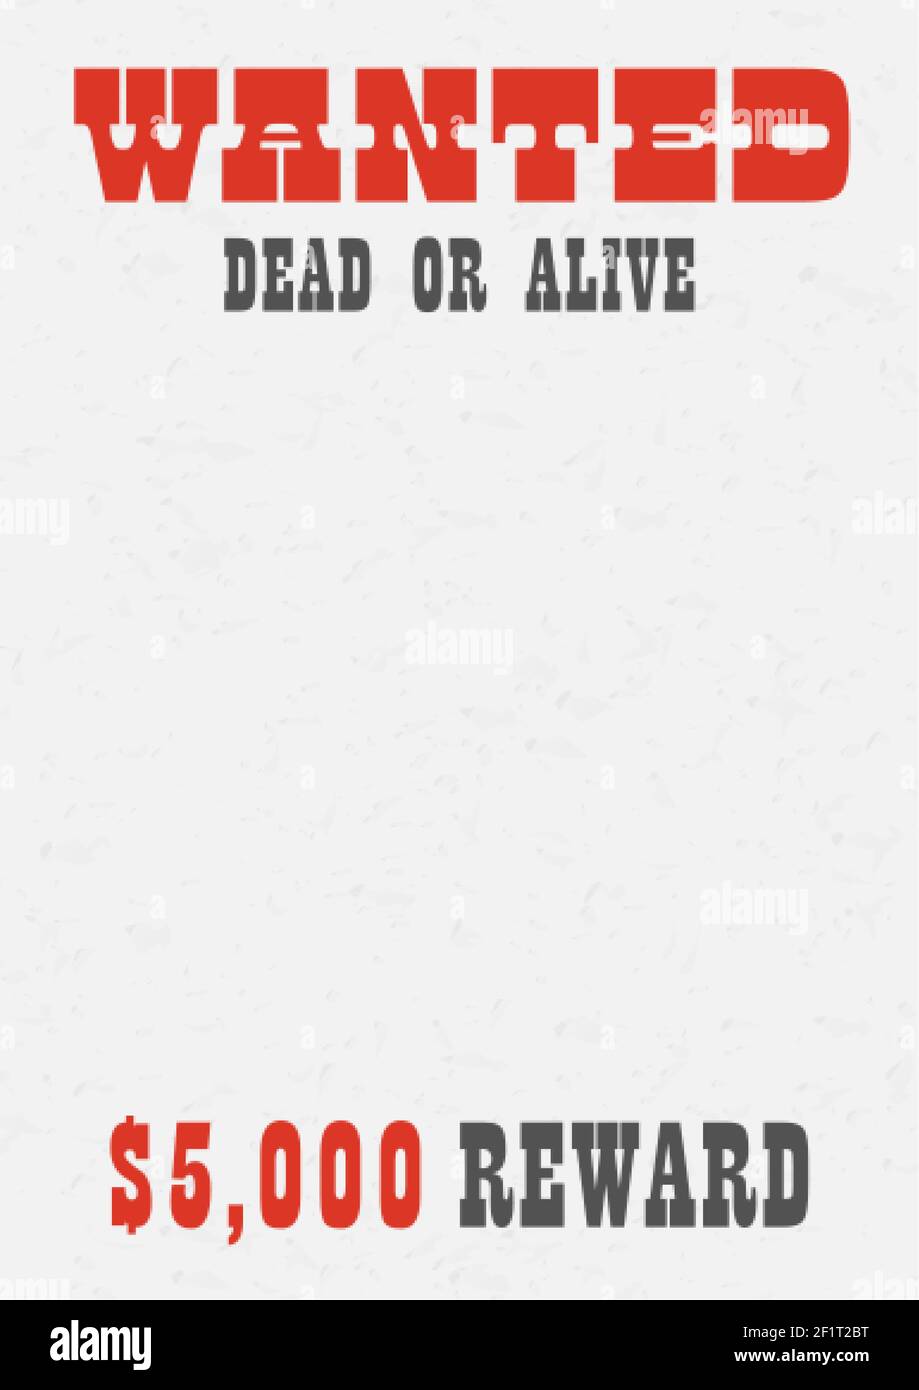 Western wanted dead or alive poster background Stock Vector